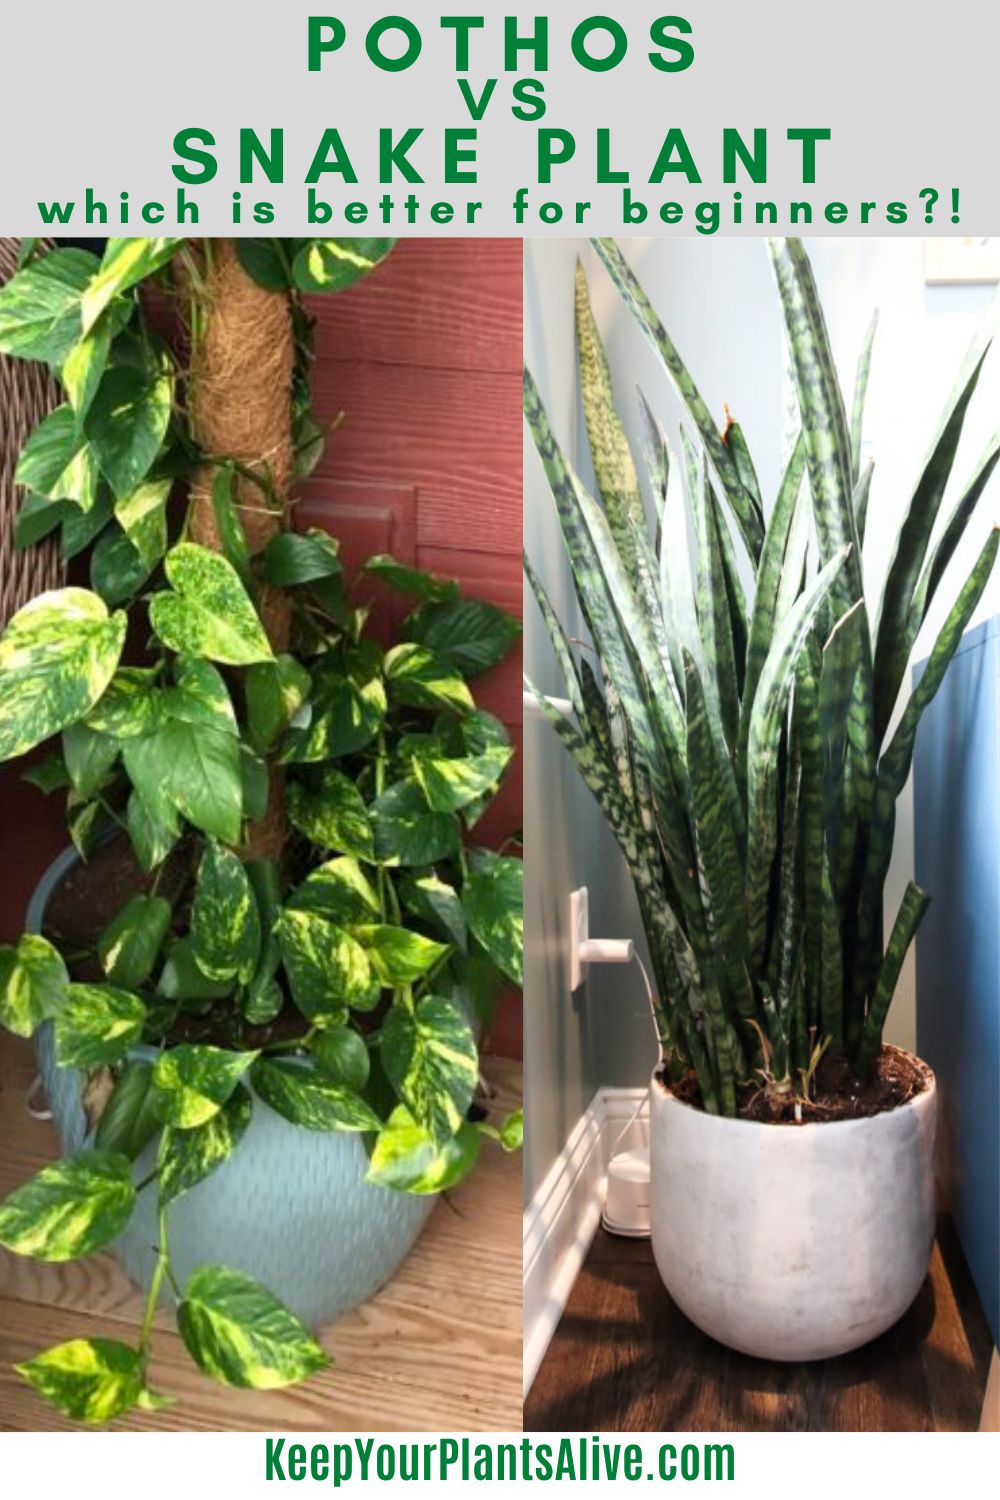 Image of Pothos and snake plant